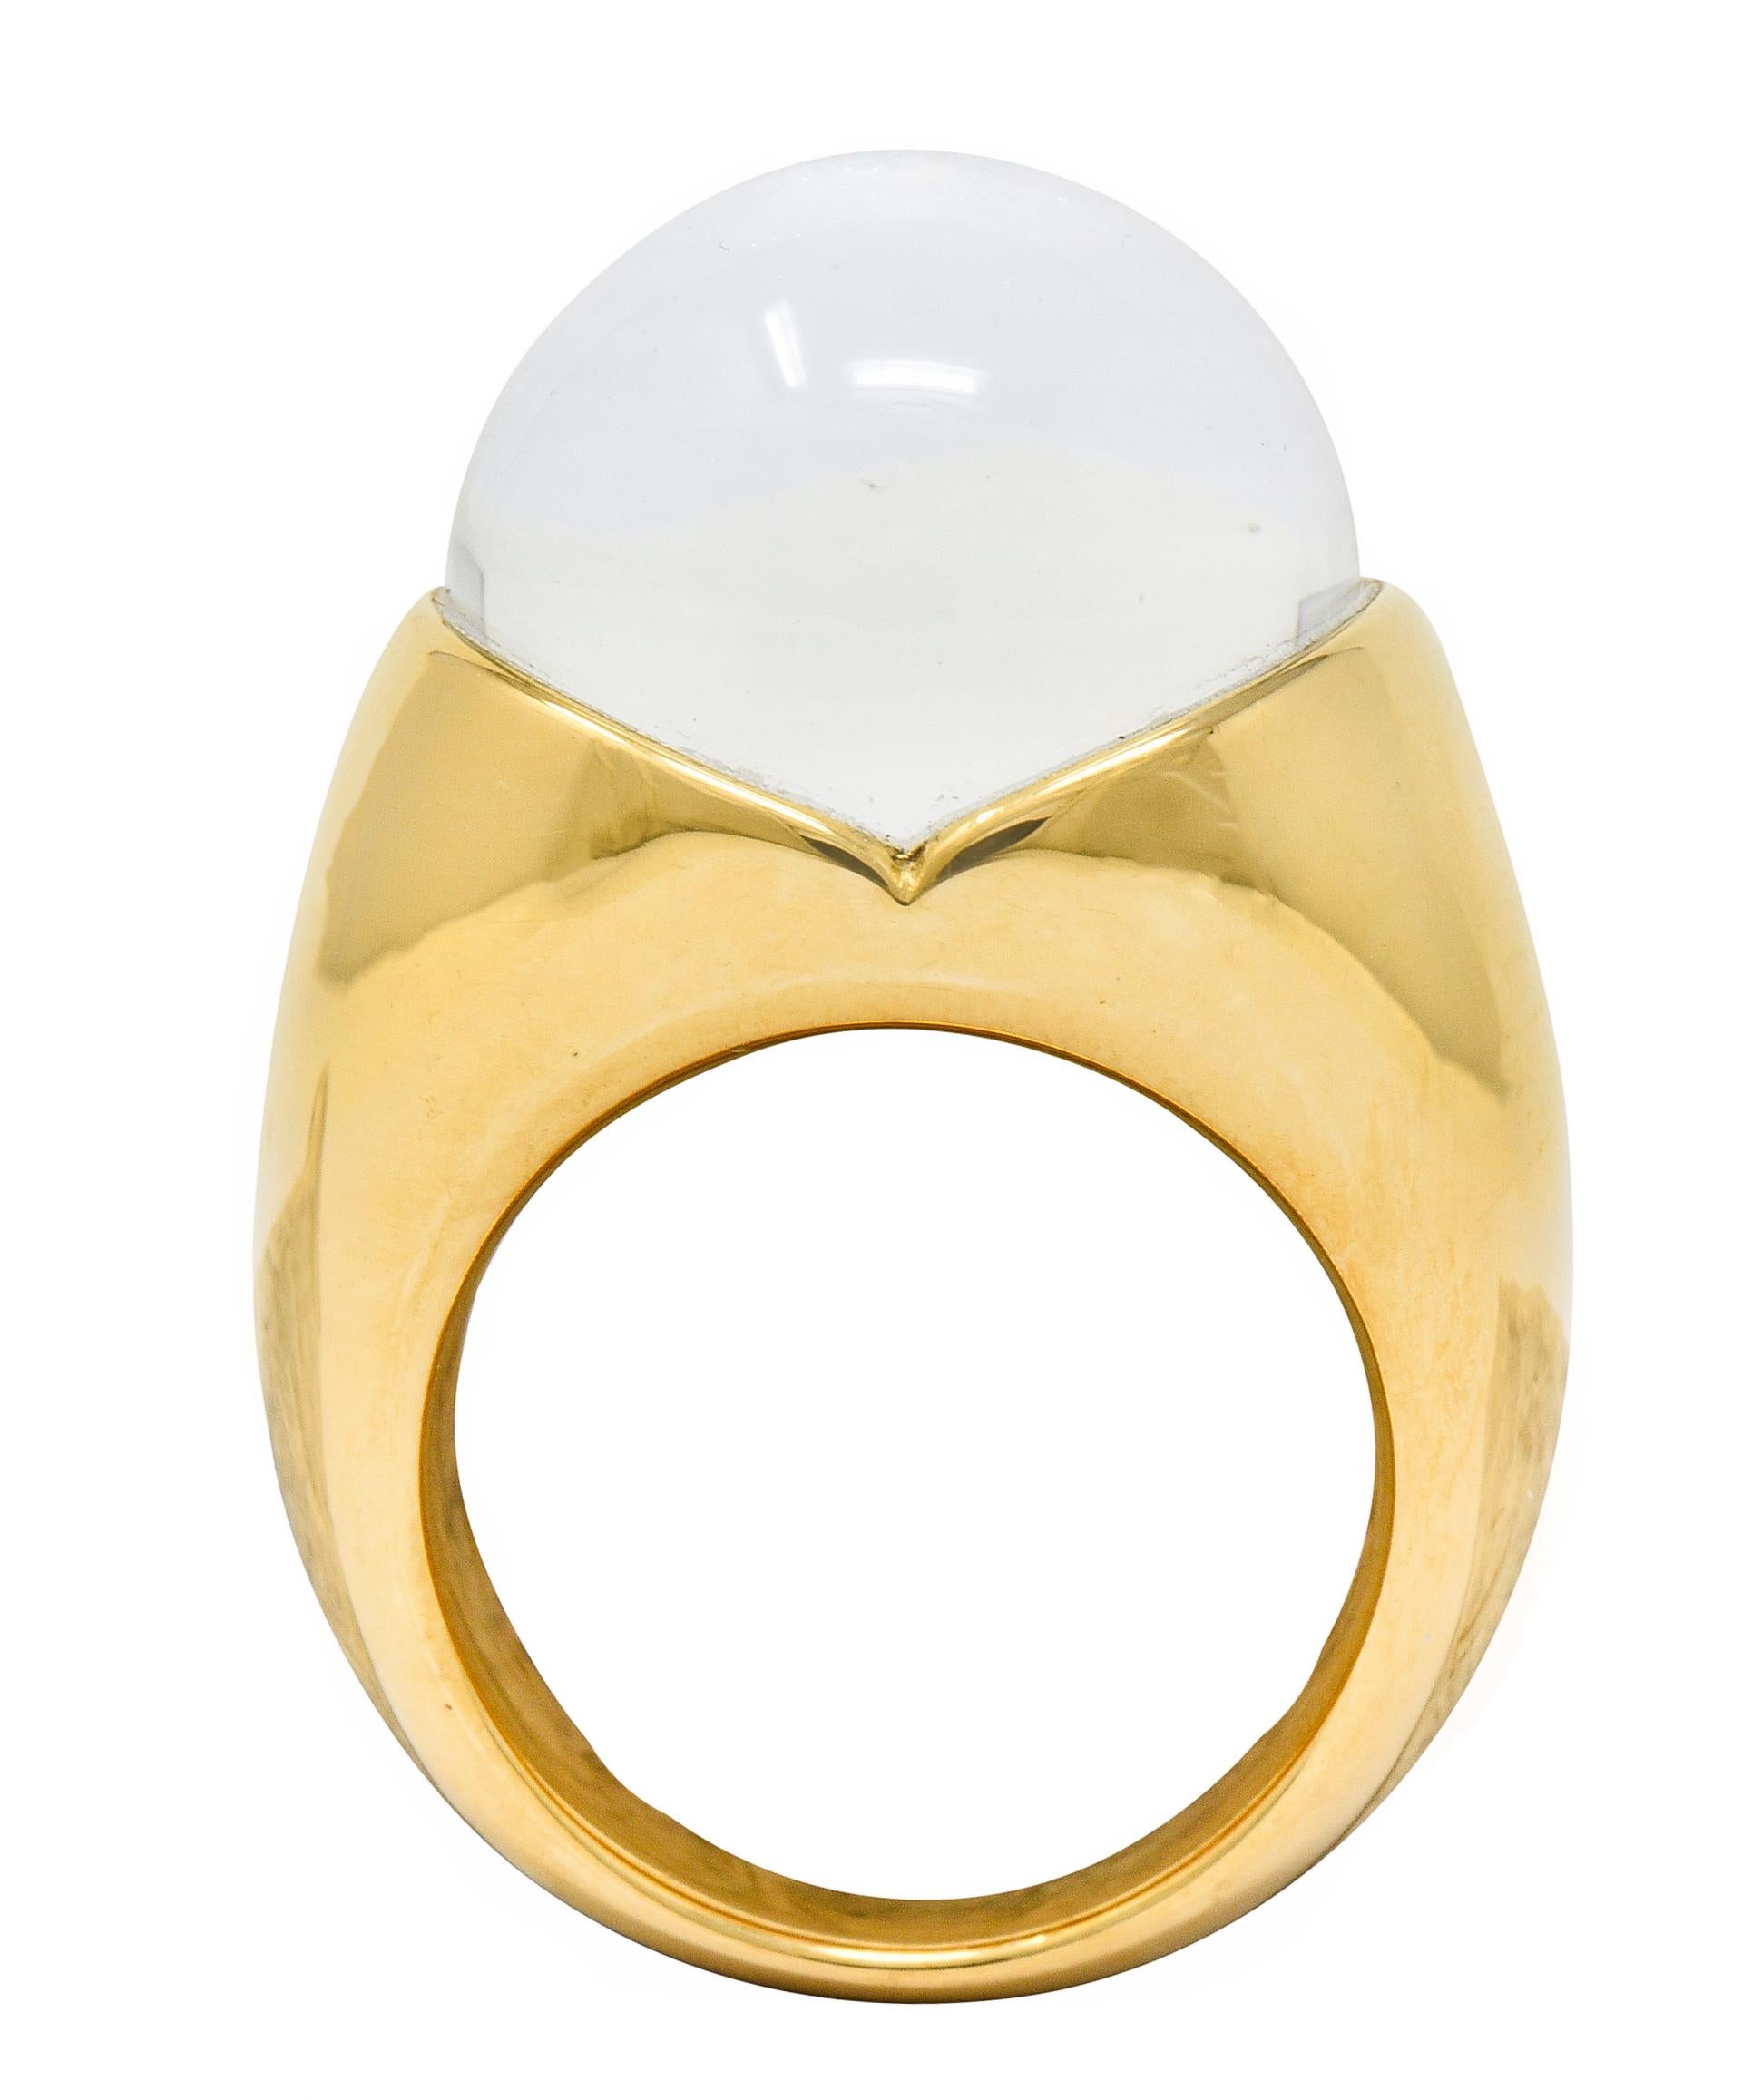 Featuring a rock crystal sphere measuring approximately 15.6 mm

Nestled securely in a high polished gold mounting atop a flush set round brilliant cut diamond

Its size is magnified through the well polished and transparent rock crystal

Stamped